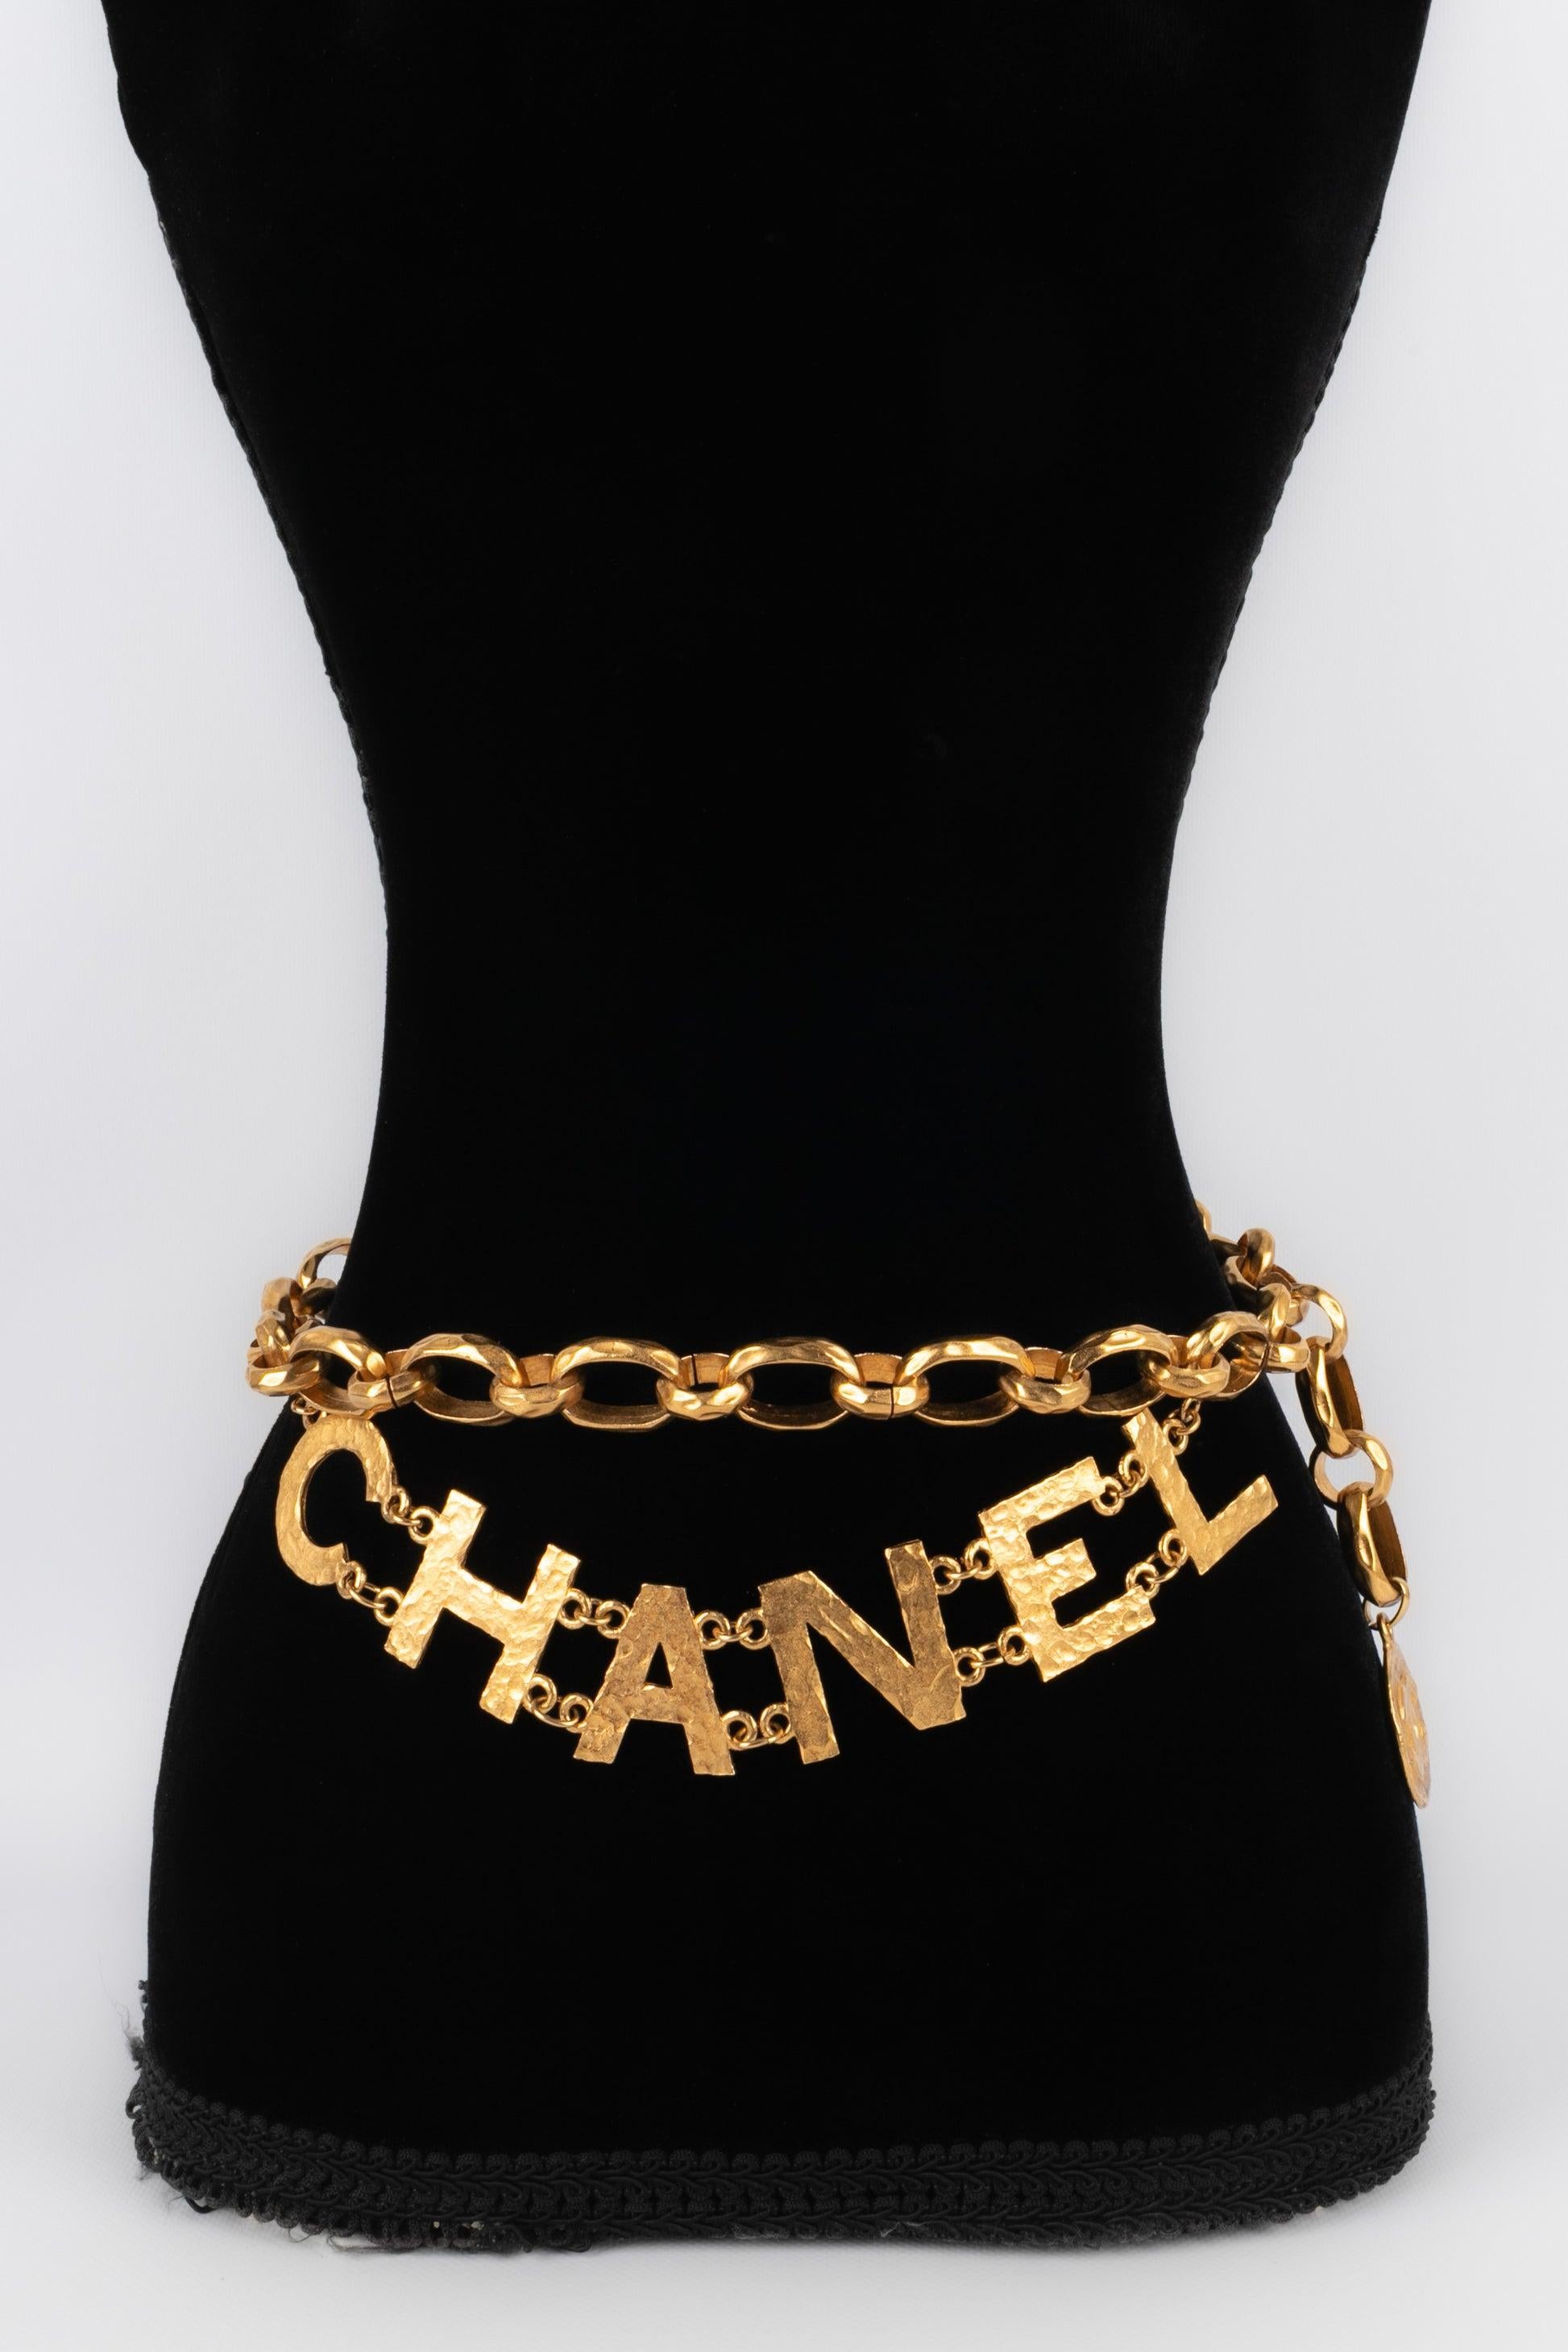 Chanel - (Made in France) Iconic golden metal belt from the 1993 Spring-Summer collection.
 
 Additional information: 
 Condition: Very good condition
 Dimensions: Length: 96 cm
 Period: 20th Century
 
 Seller Reference: CCB63